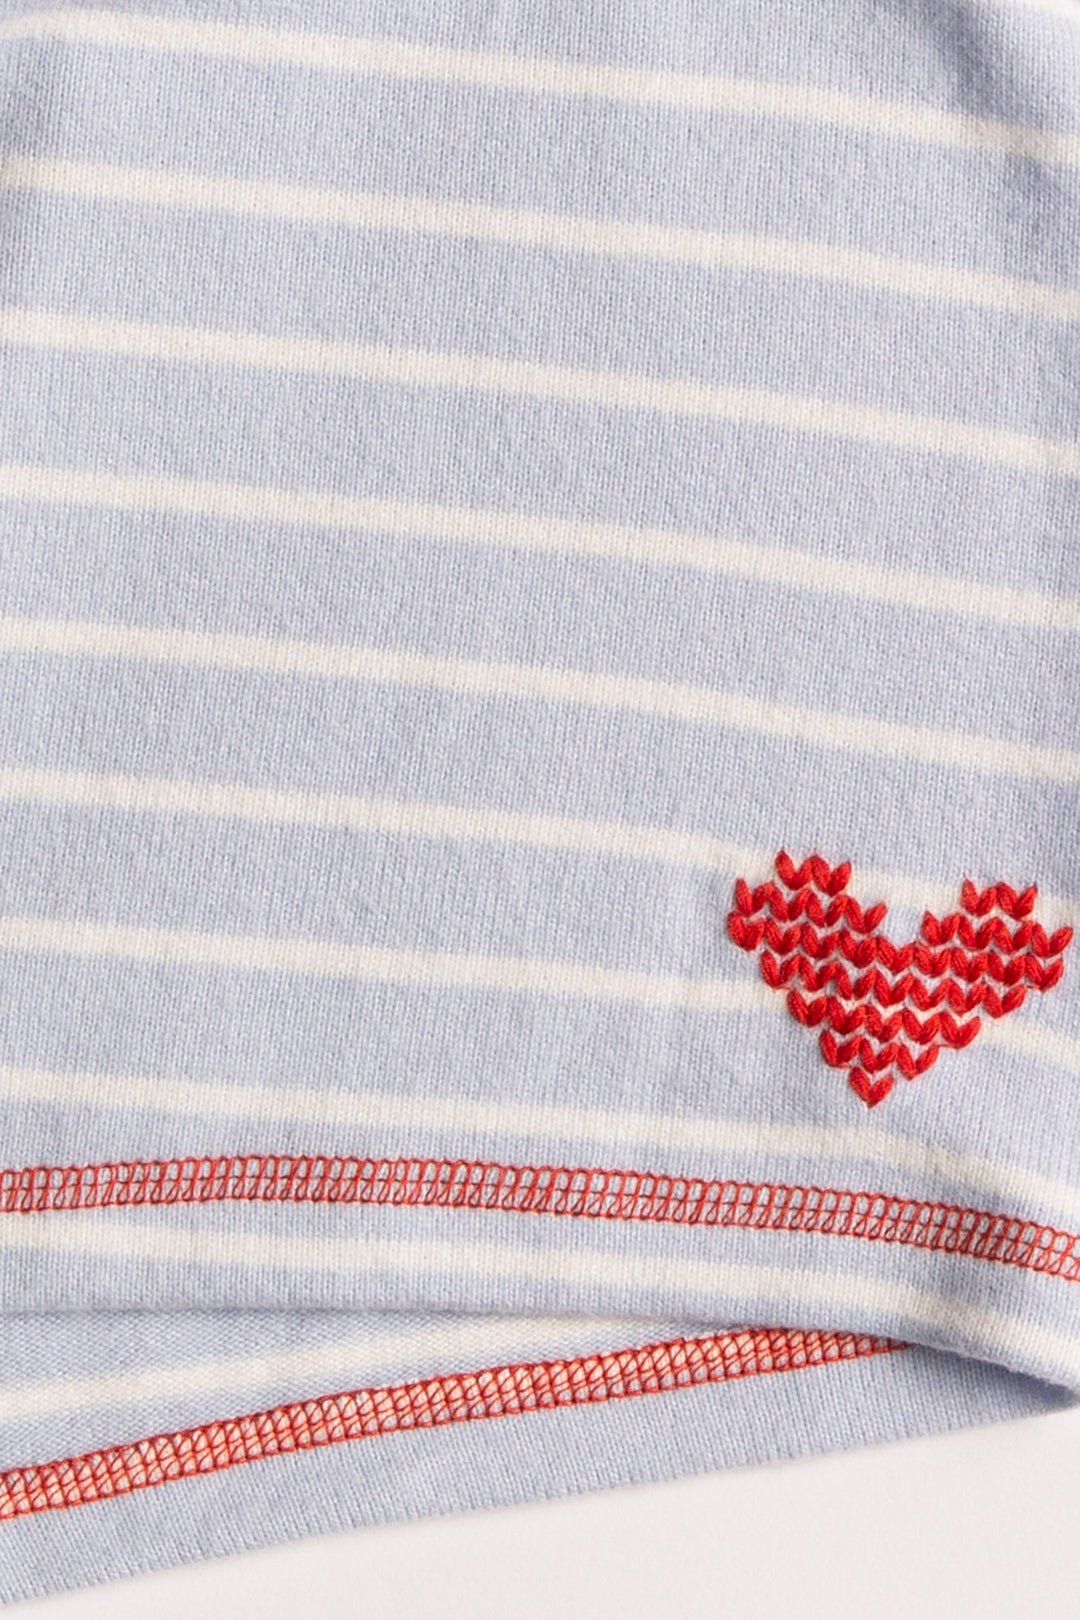 PJ set in blue-white striped knit, red stitching & heart embroidery at sleeve & pant cuffs. Red ties. (7257680314468)